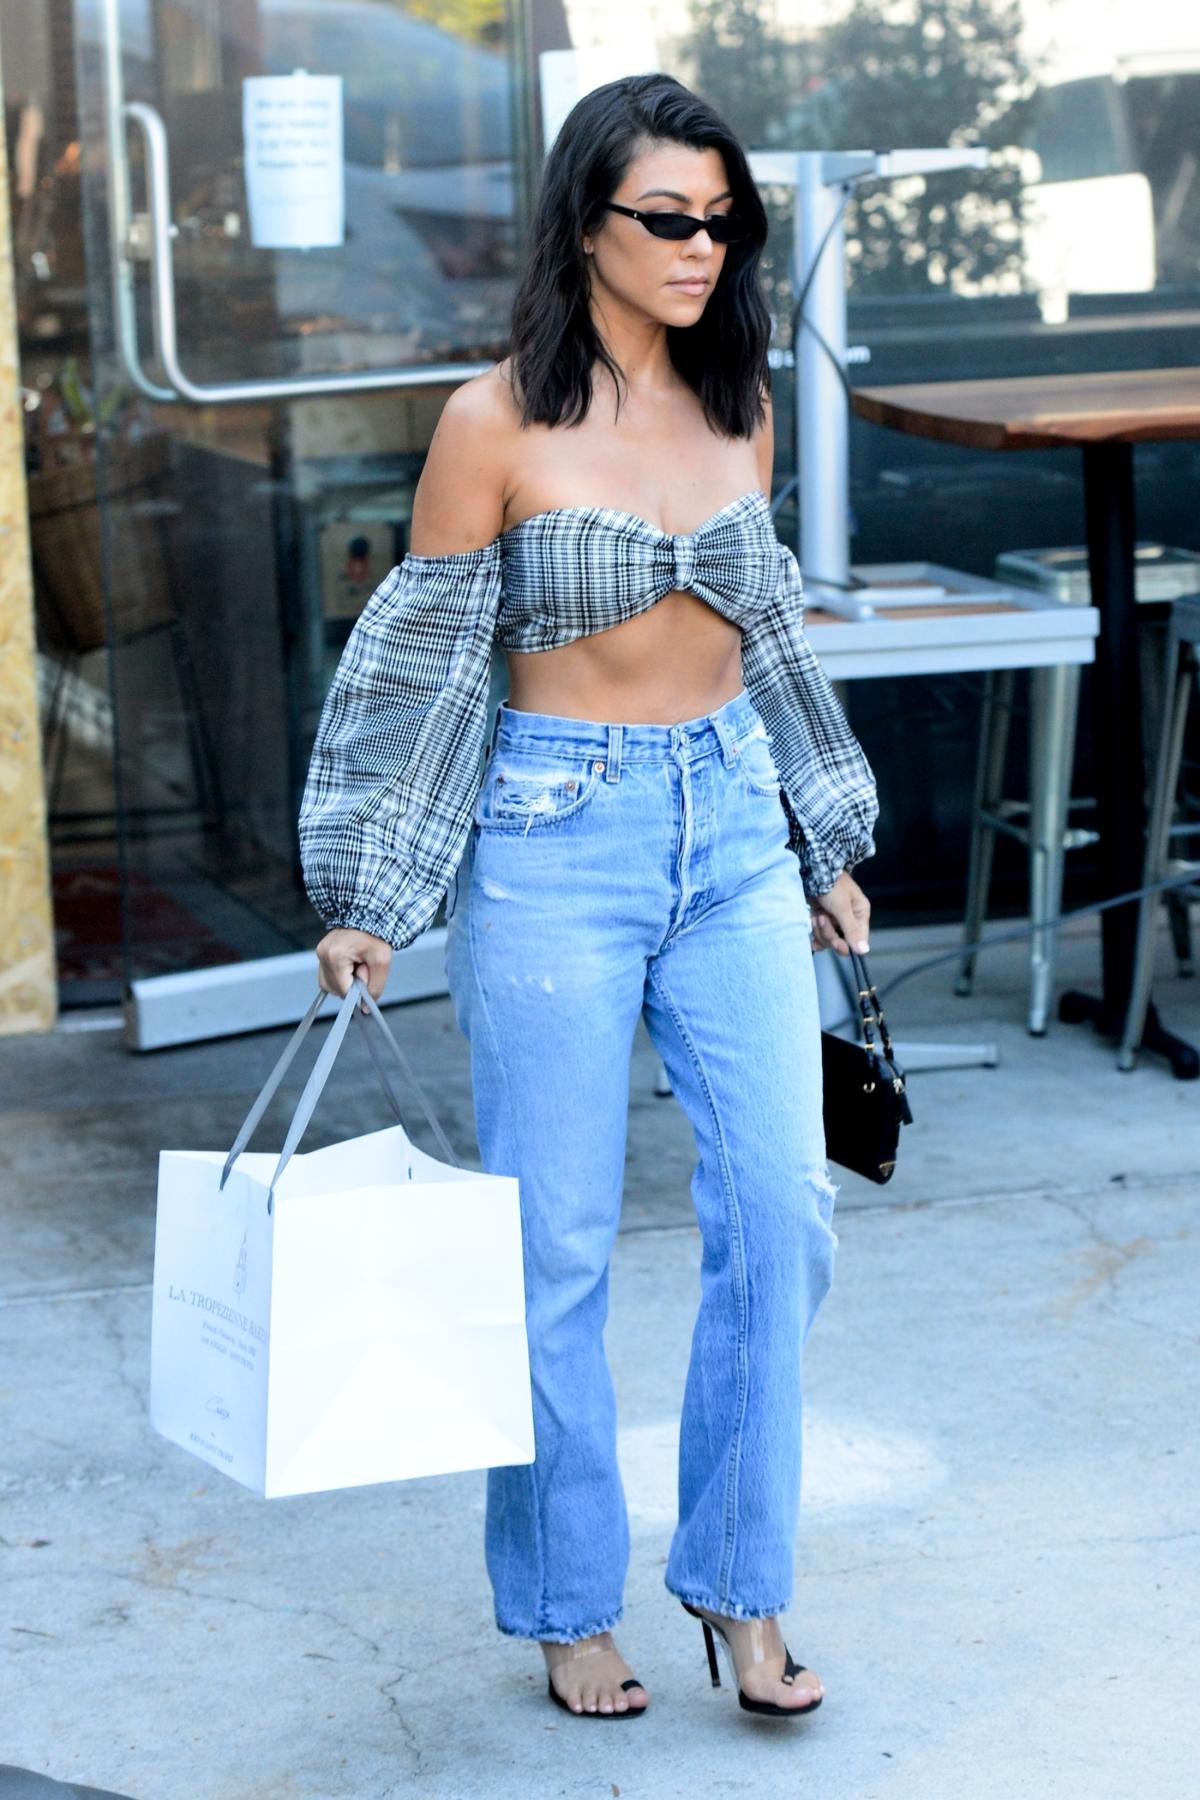 Stars are baring their abs in sexy summer crop tops under $100